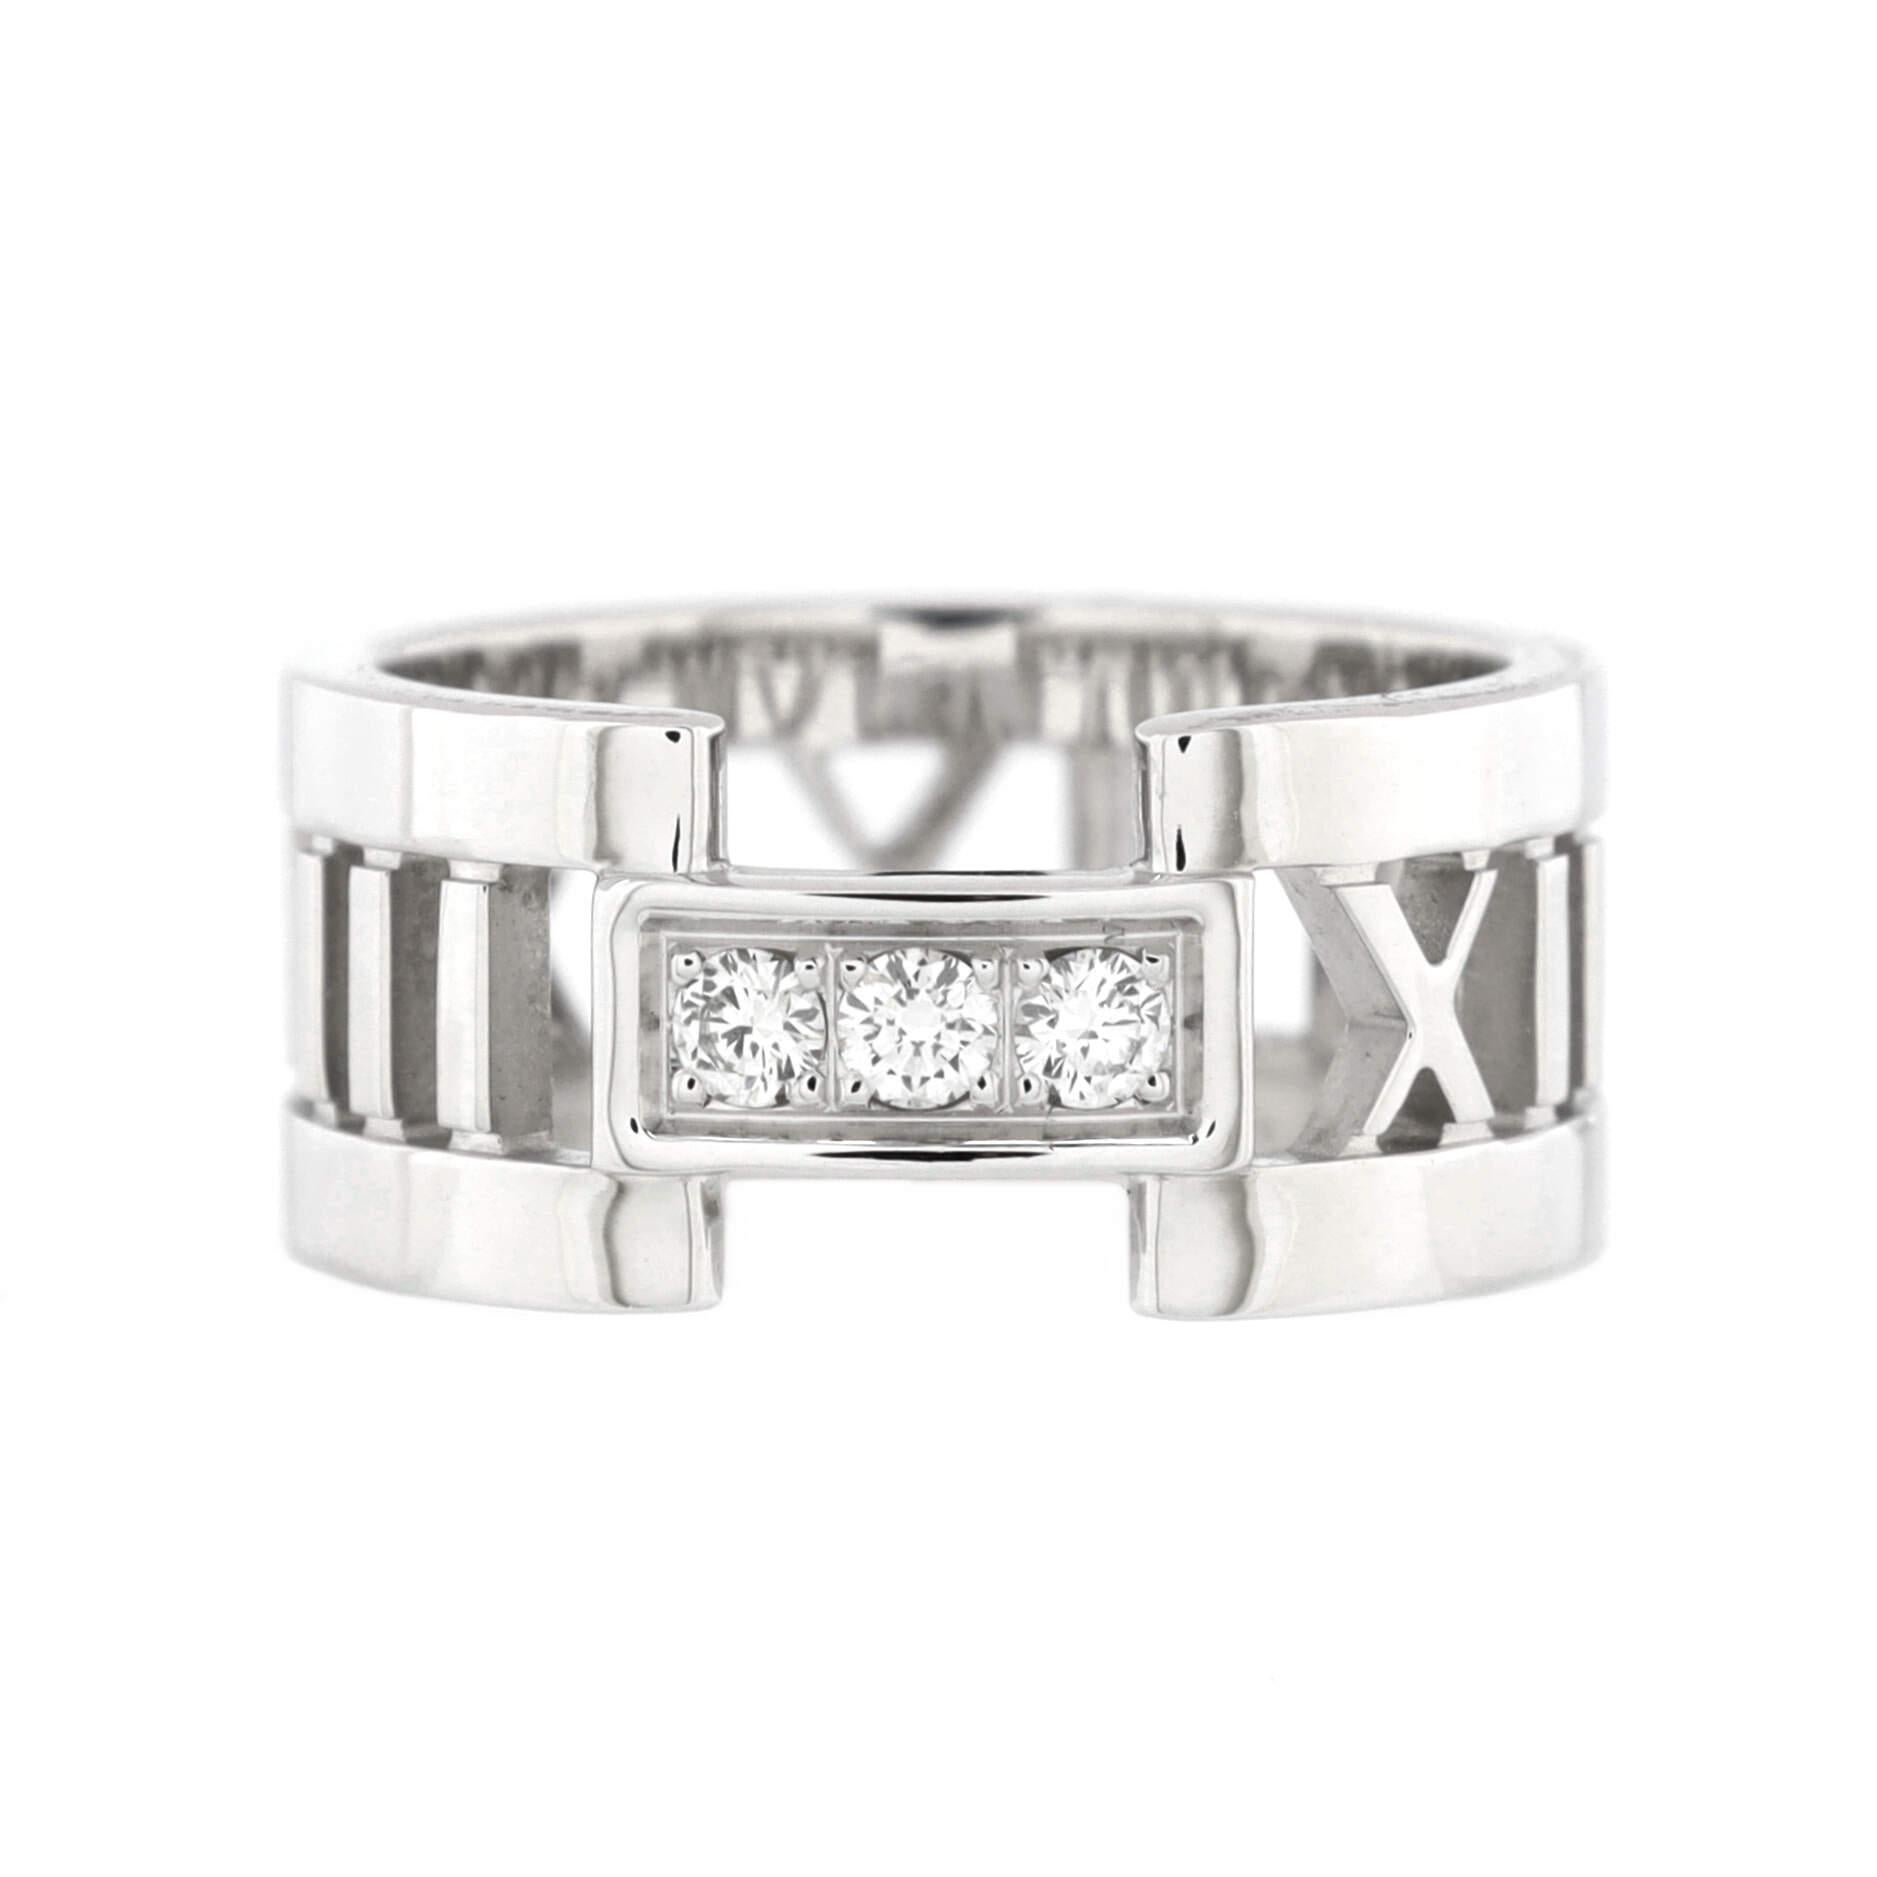 Condition: Great. Minor wear throughout.
Accessories: No Accessories
Measurements: Size: 5.25 - 50, Width: 8.50 mm
Designer: Tiffany & Co.
Model: Atlas Open Band Ring 18K White Gold and Diamonds
Exterior Color: White Gold
Item Number: 217943/7